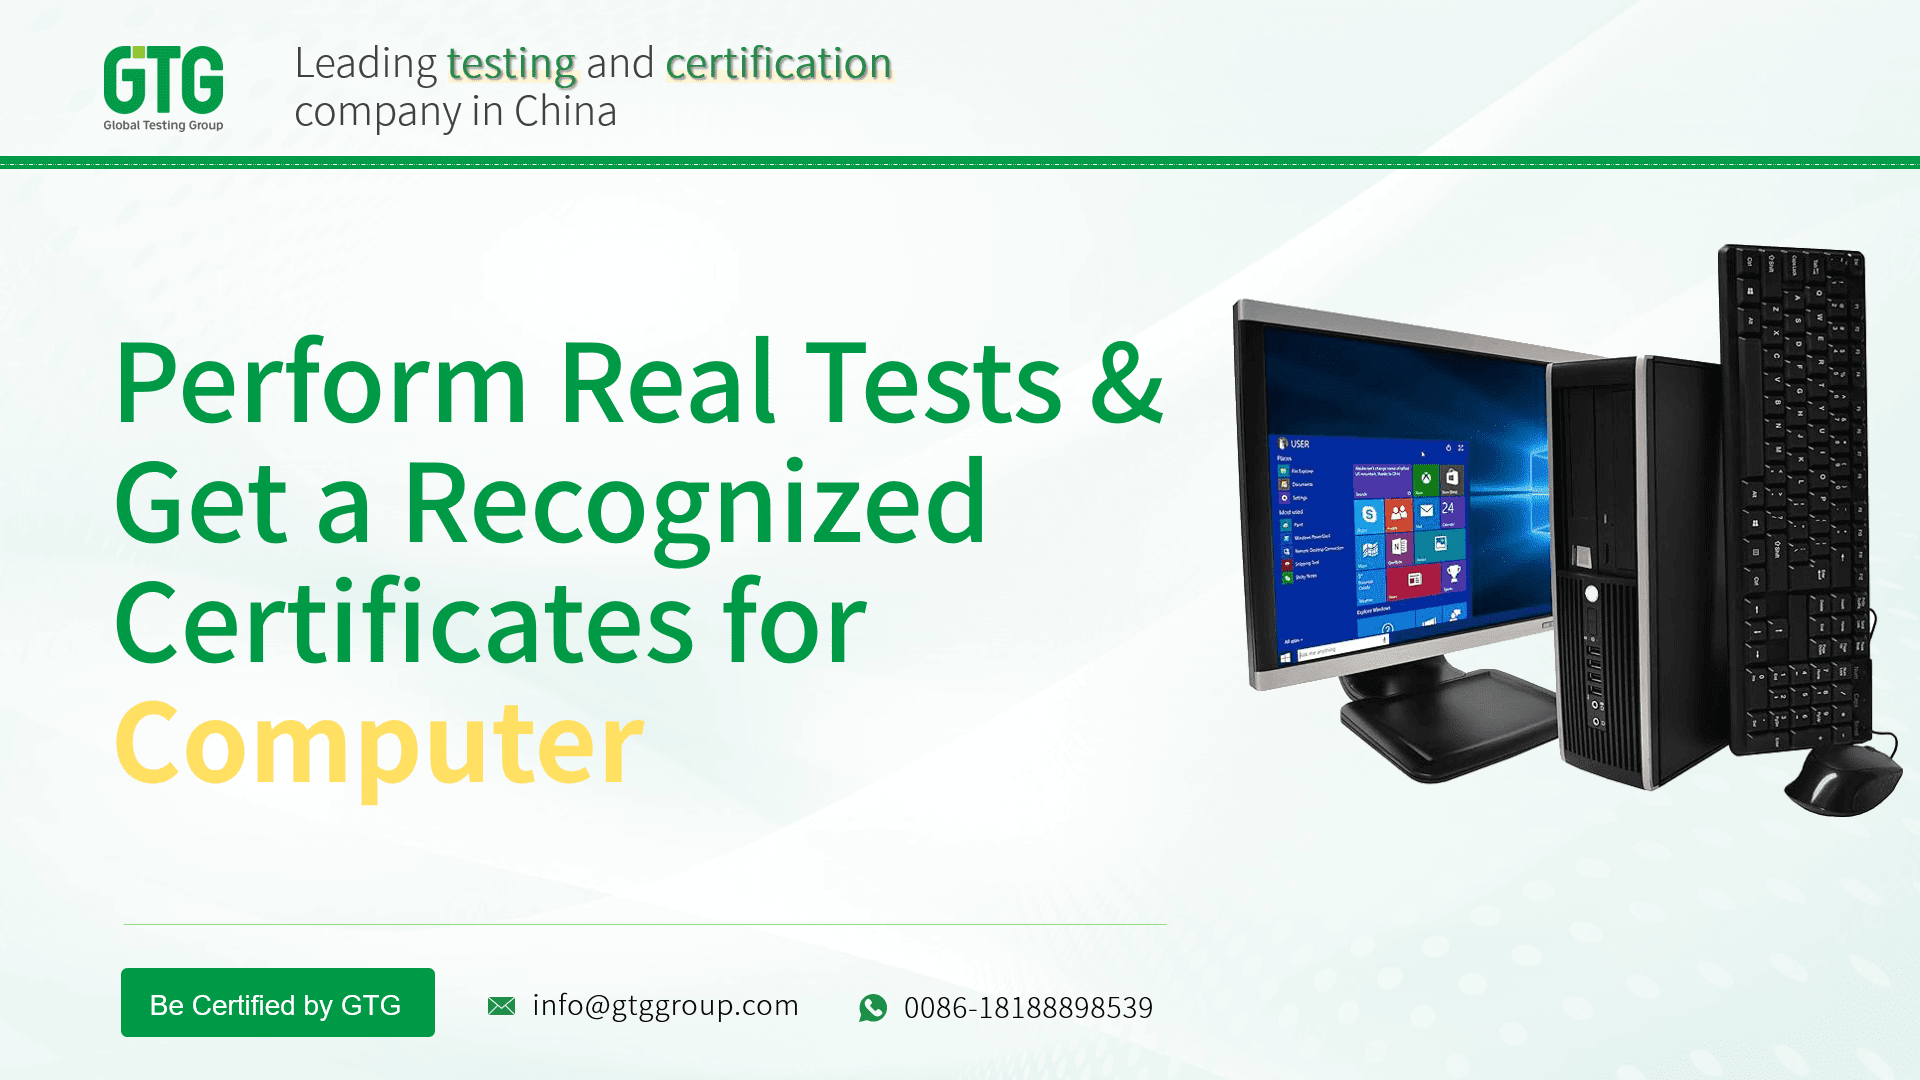 Get Test Report and Certifications for Computer from GTG Group